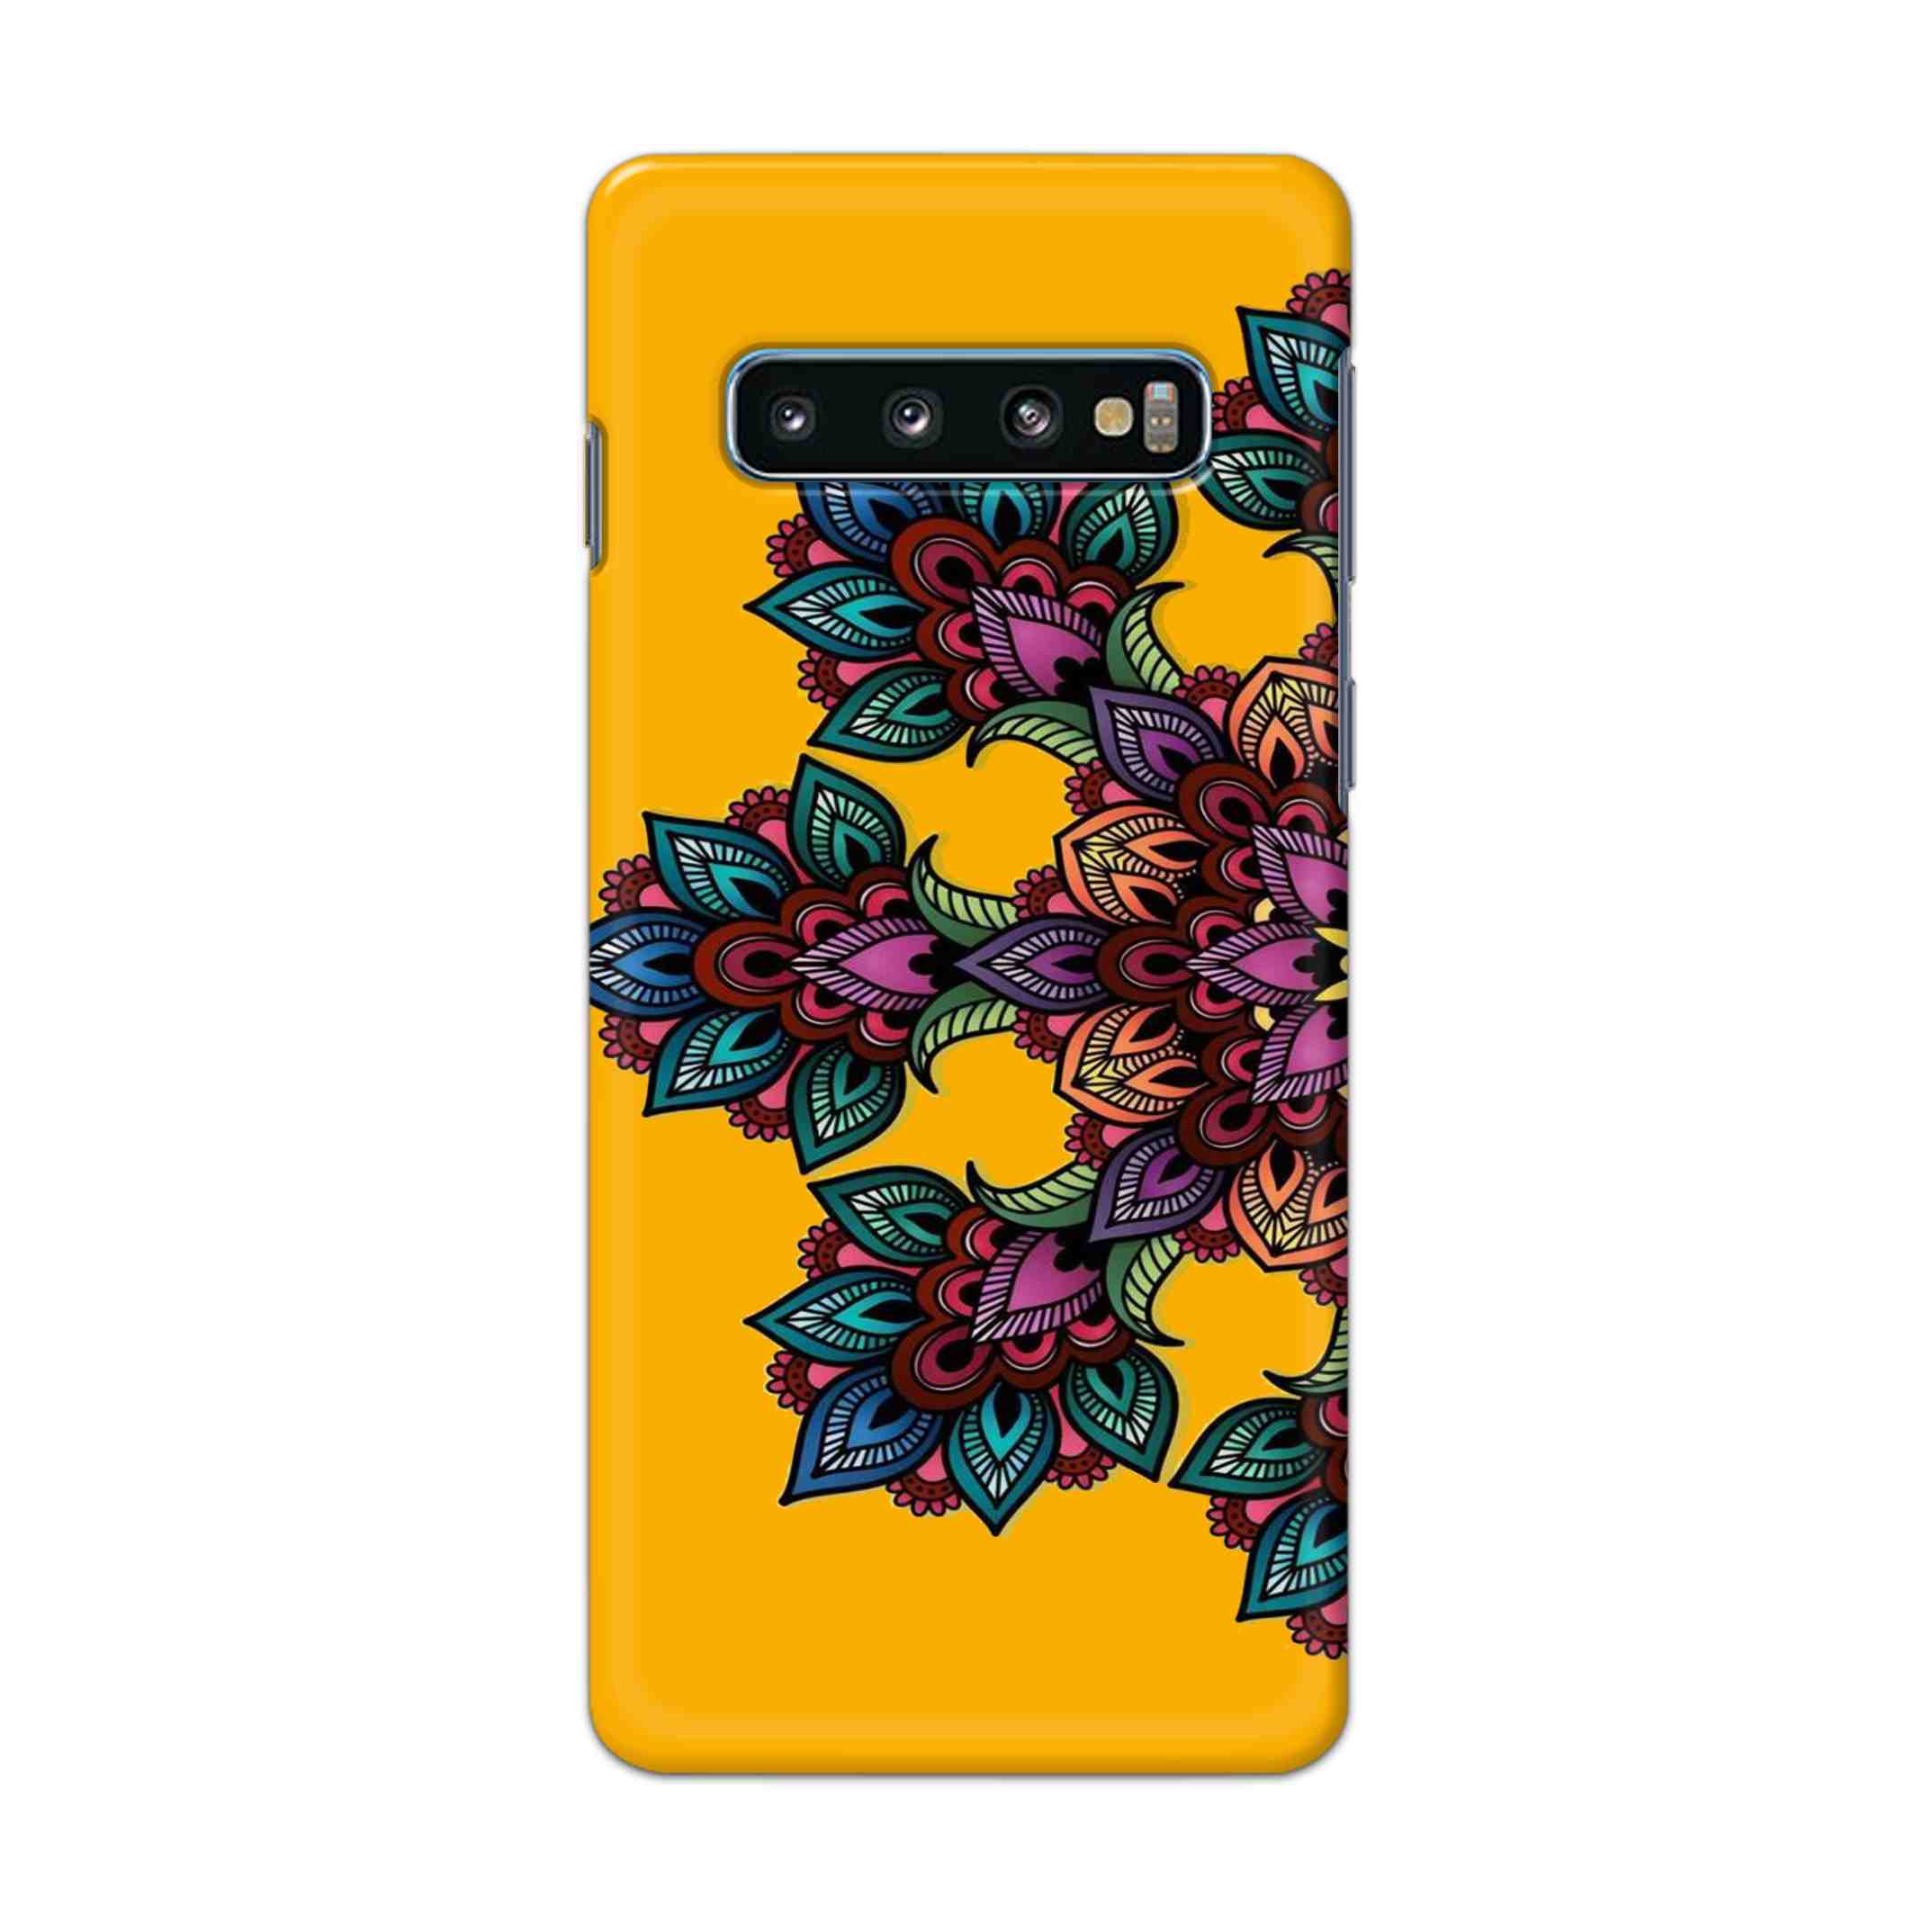 Buy The Celtic Mandala Hard Back Mobile Phone Case Cover For Samsung Galaxy S10 Plus Online